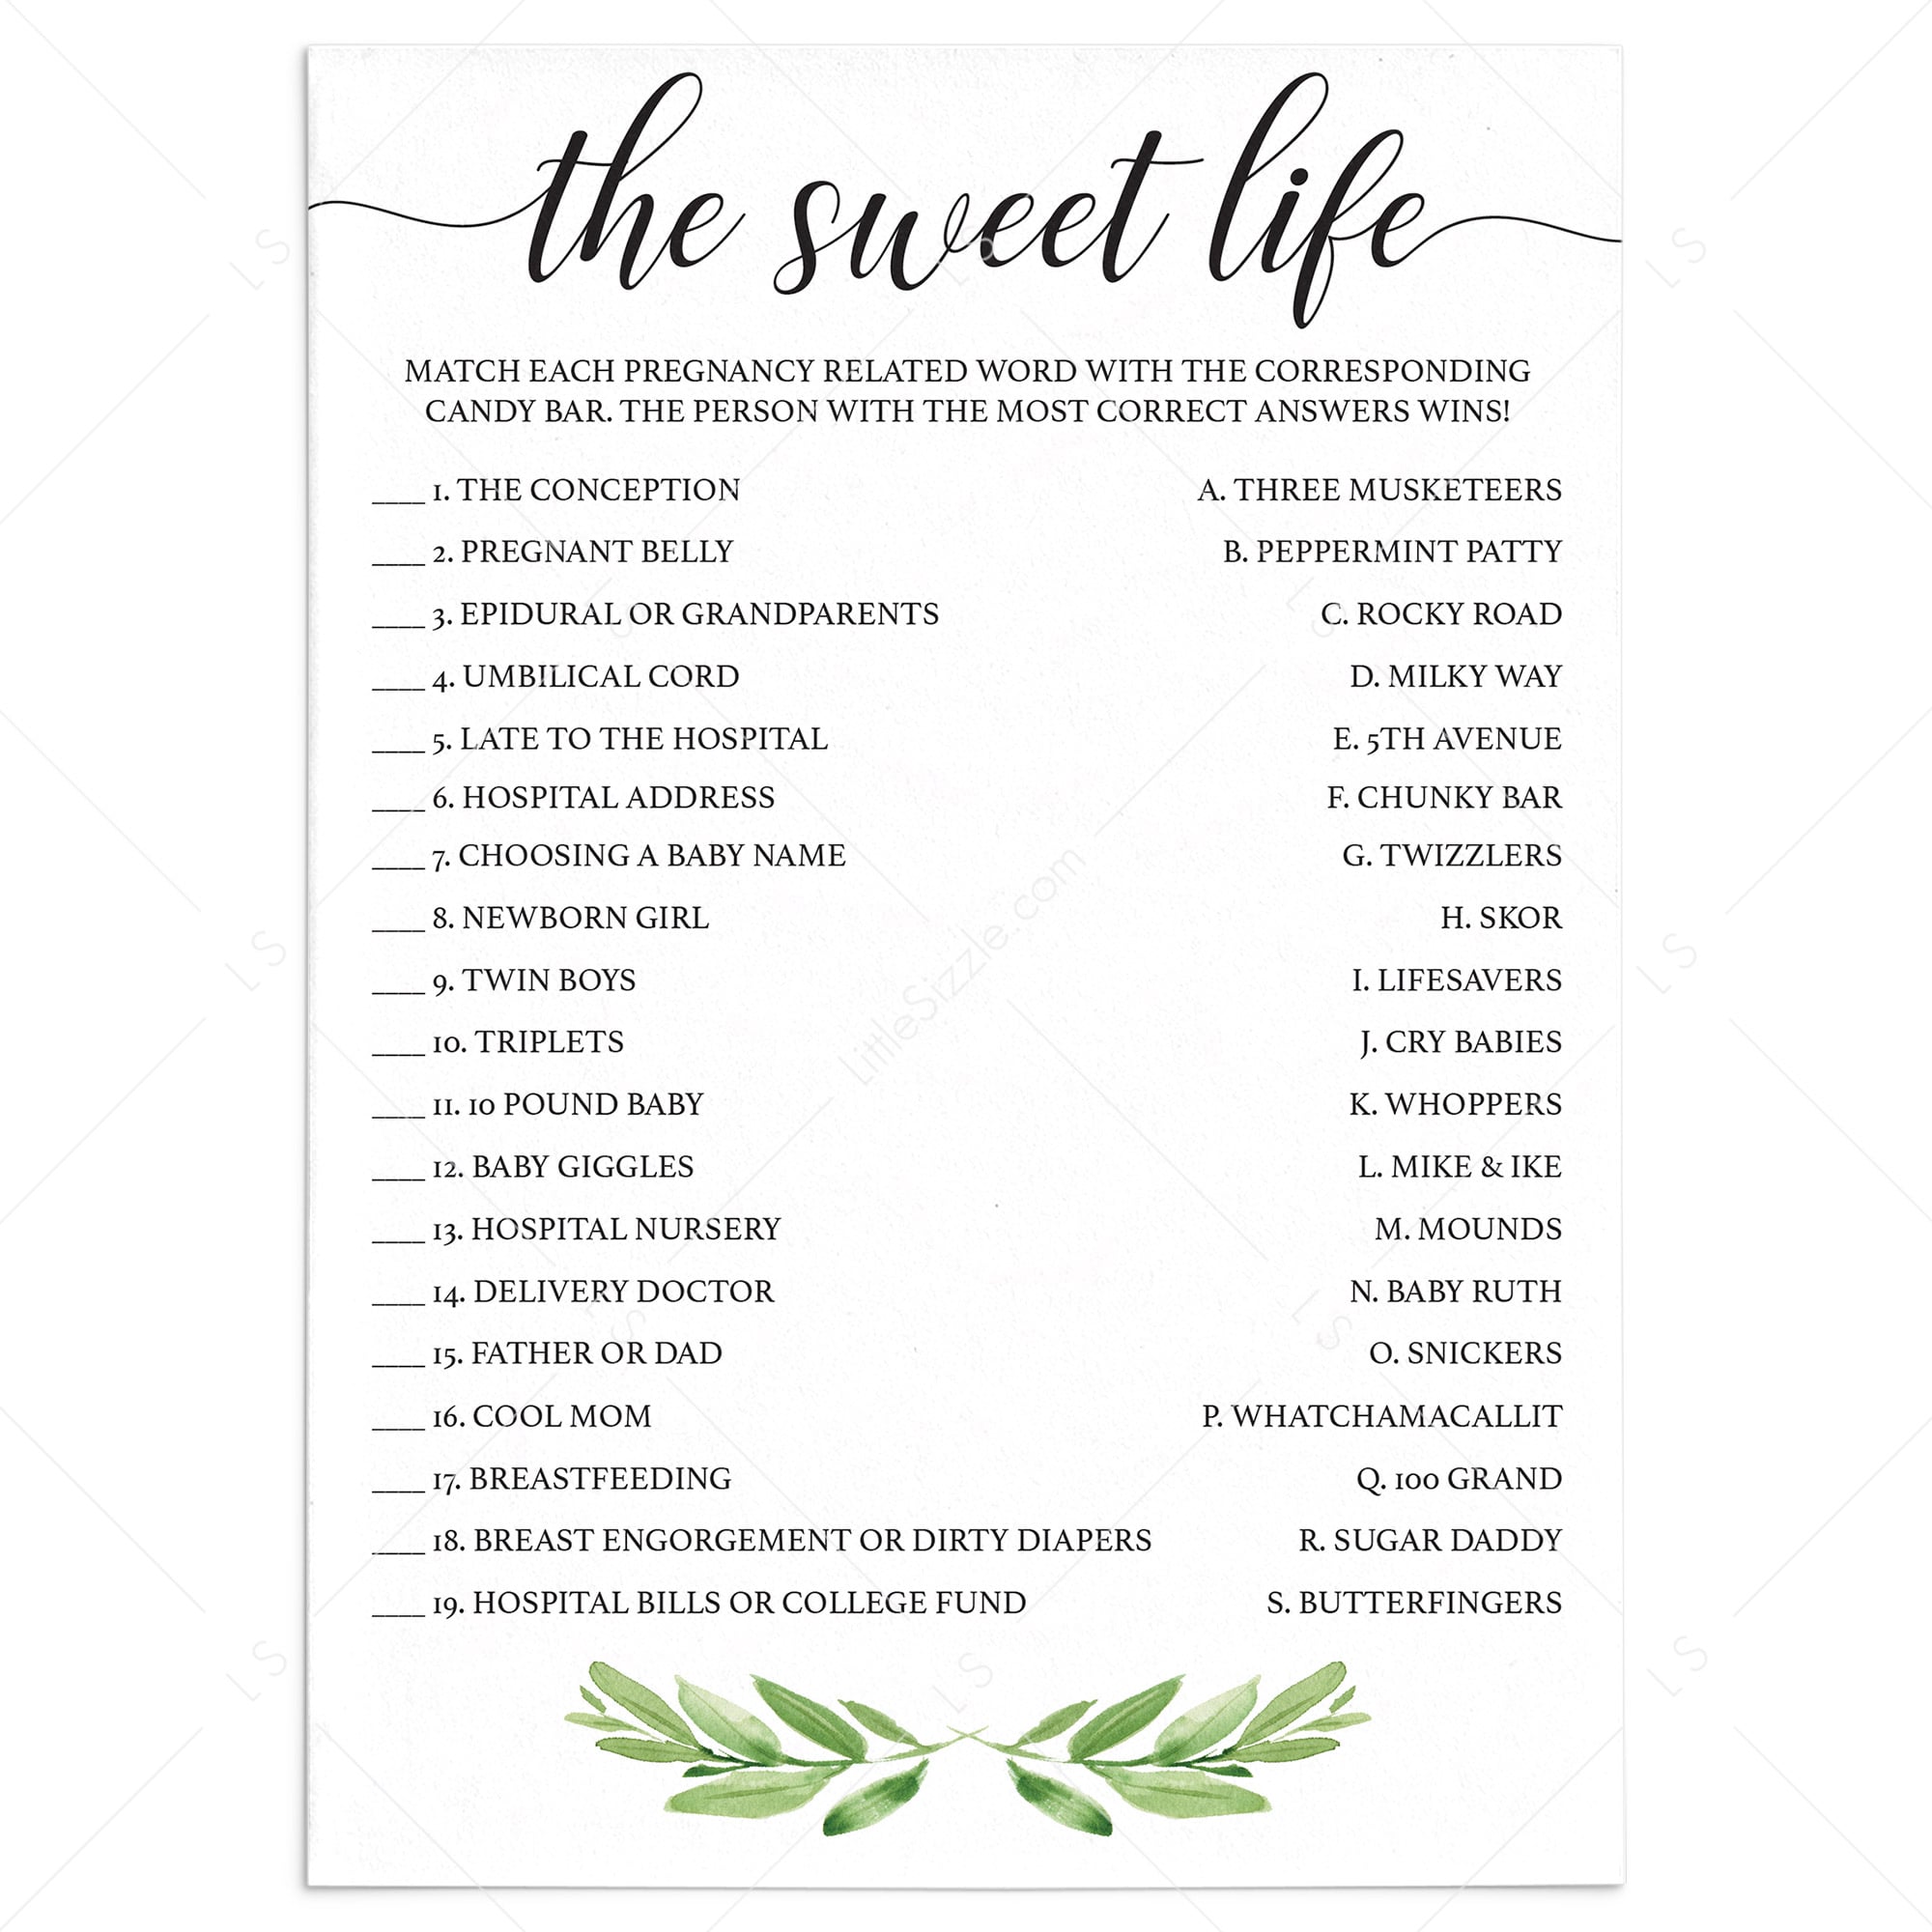 The Sweet Life baby shower game Candy Bar Match